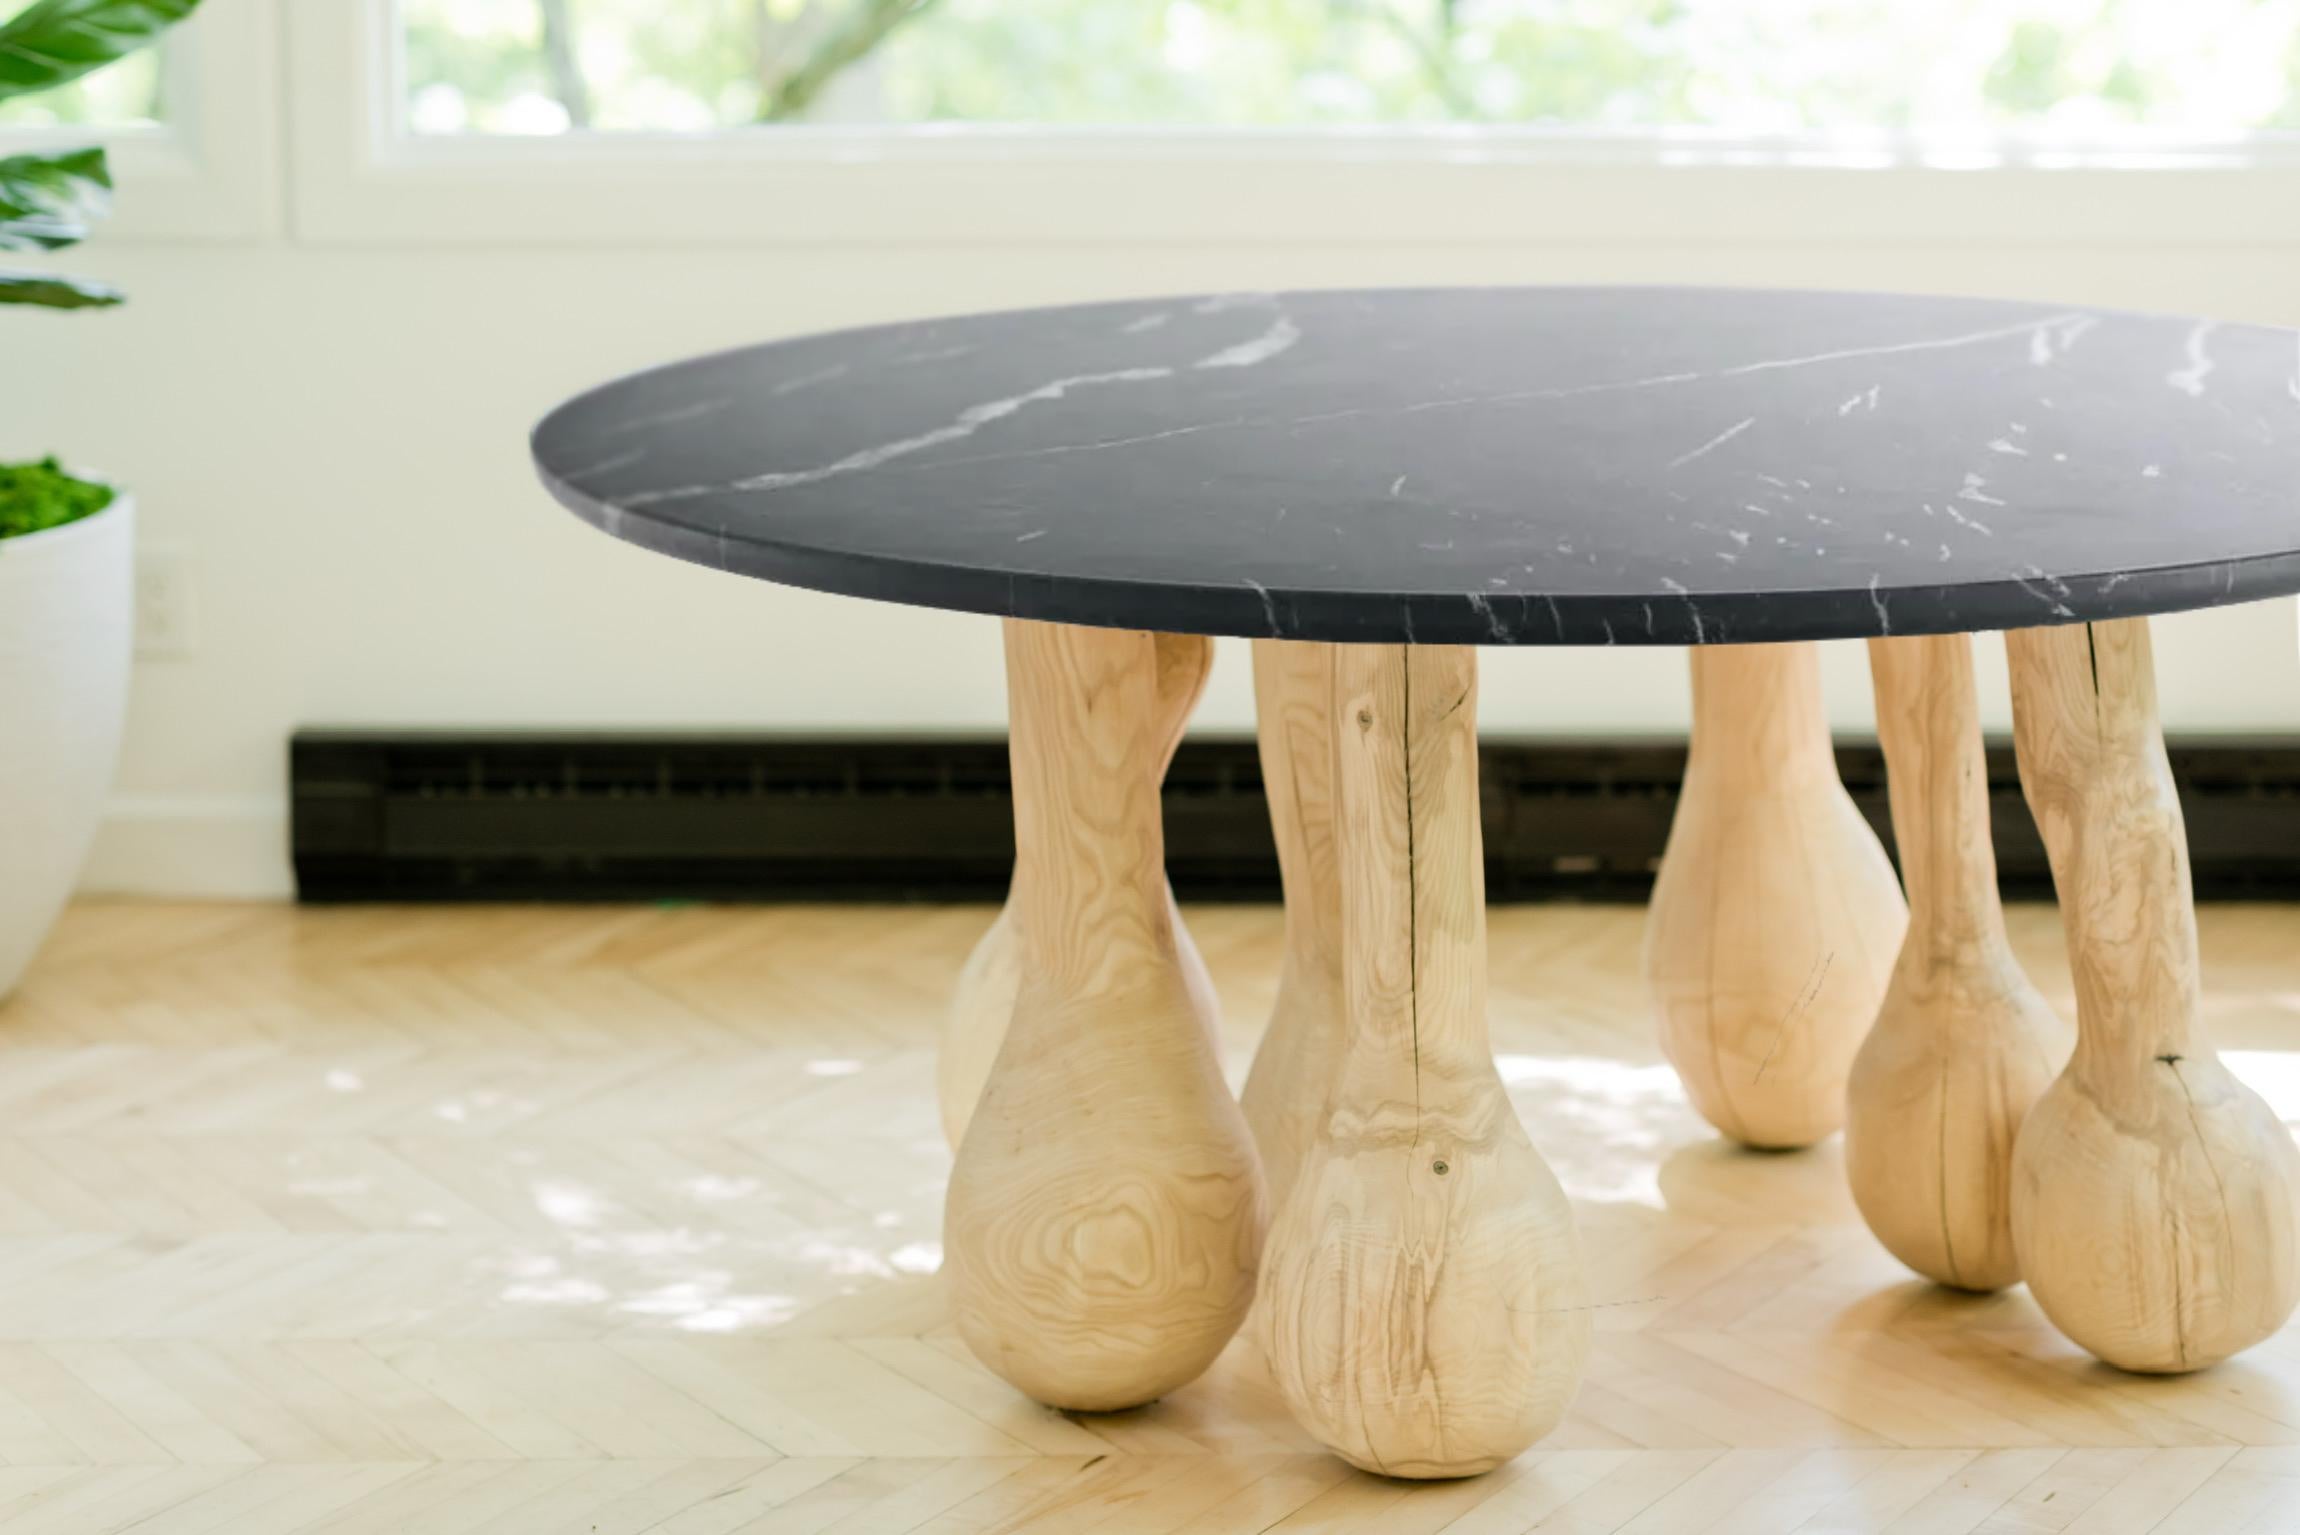 Carved from wood that whispers tales of its earthy origins, the table stands on legs shaped like droplets of time - bulbous and full of gravity, yet utterly balanced. 

In this work, the artist reimagines the traditional dining table as a living,